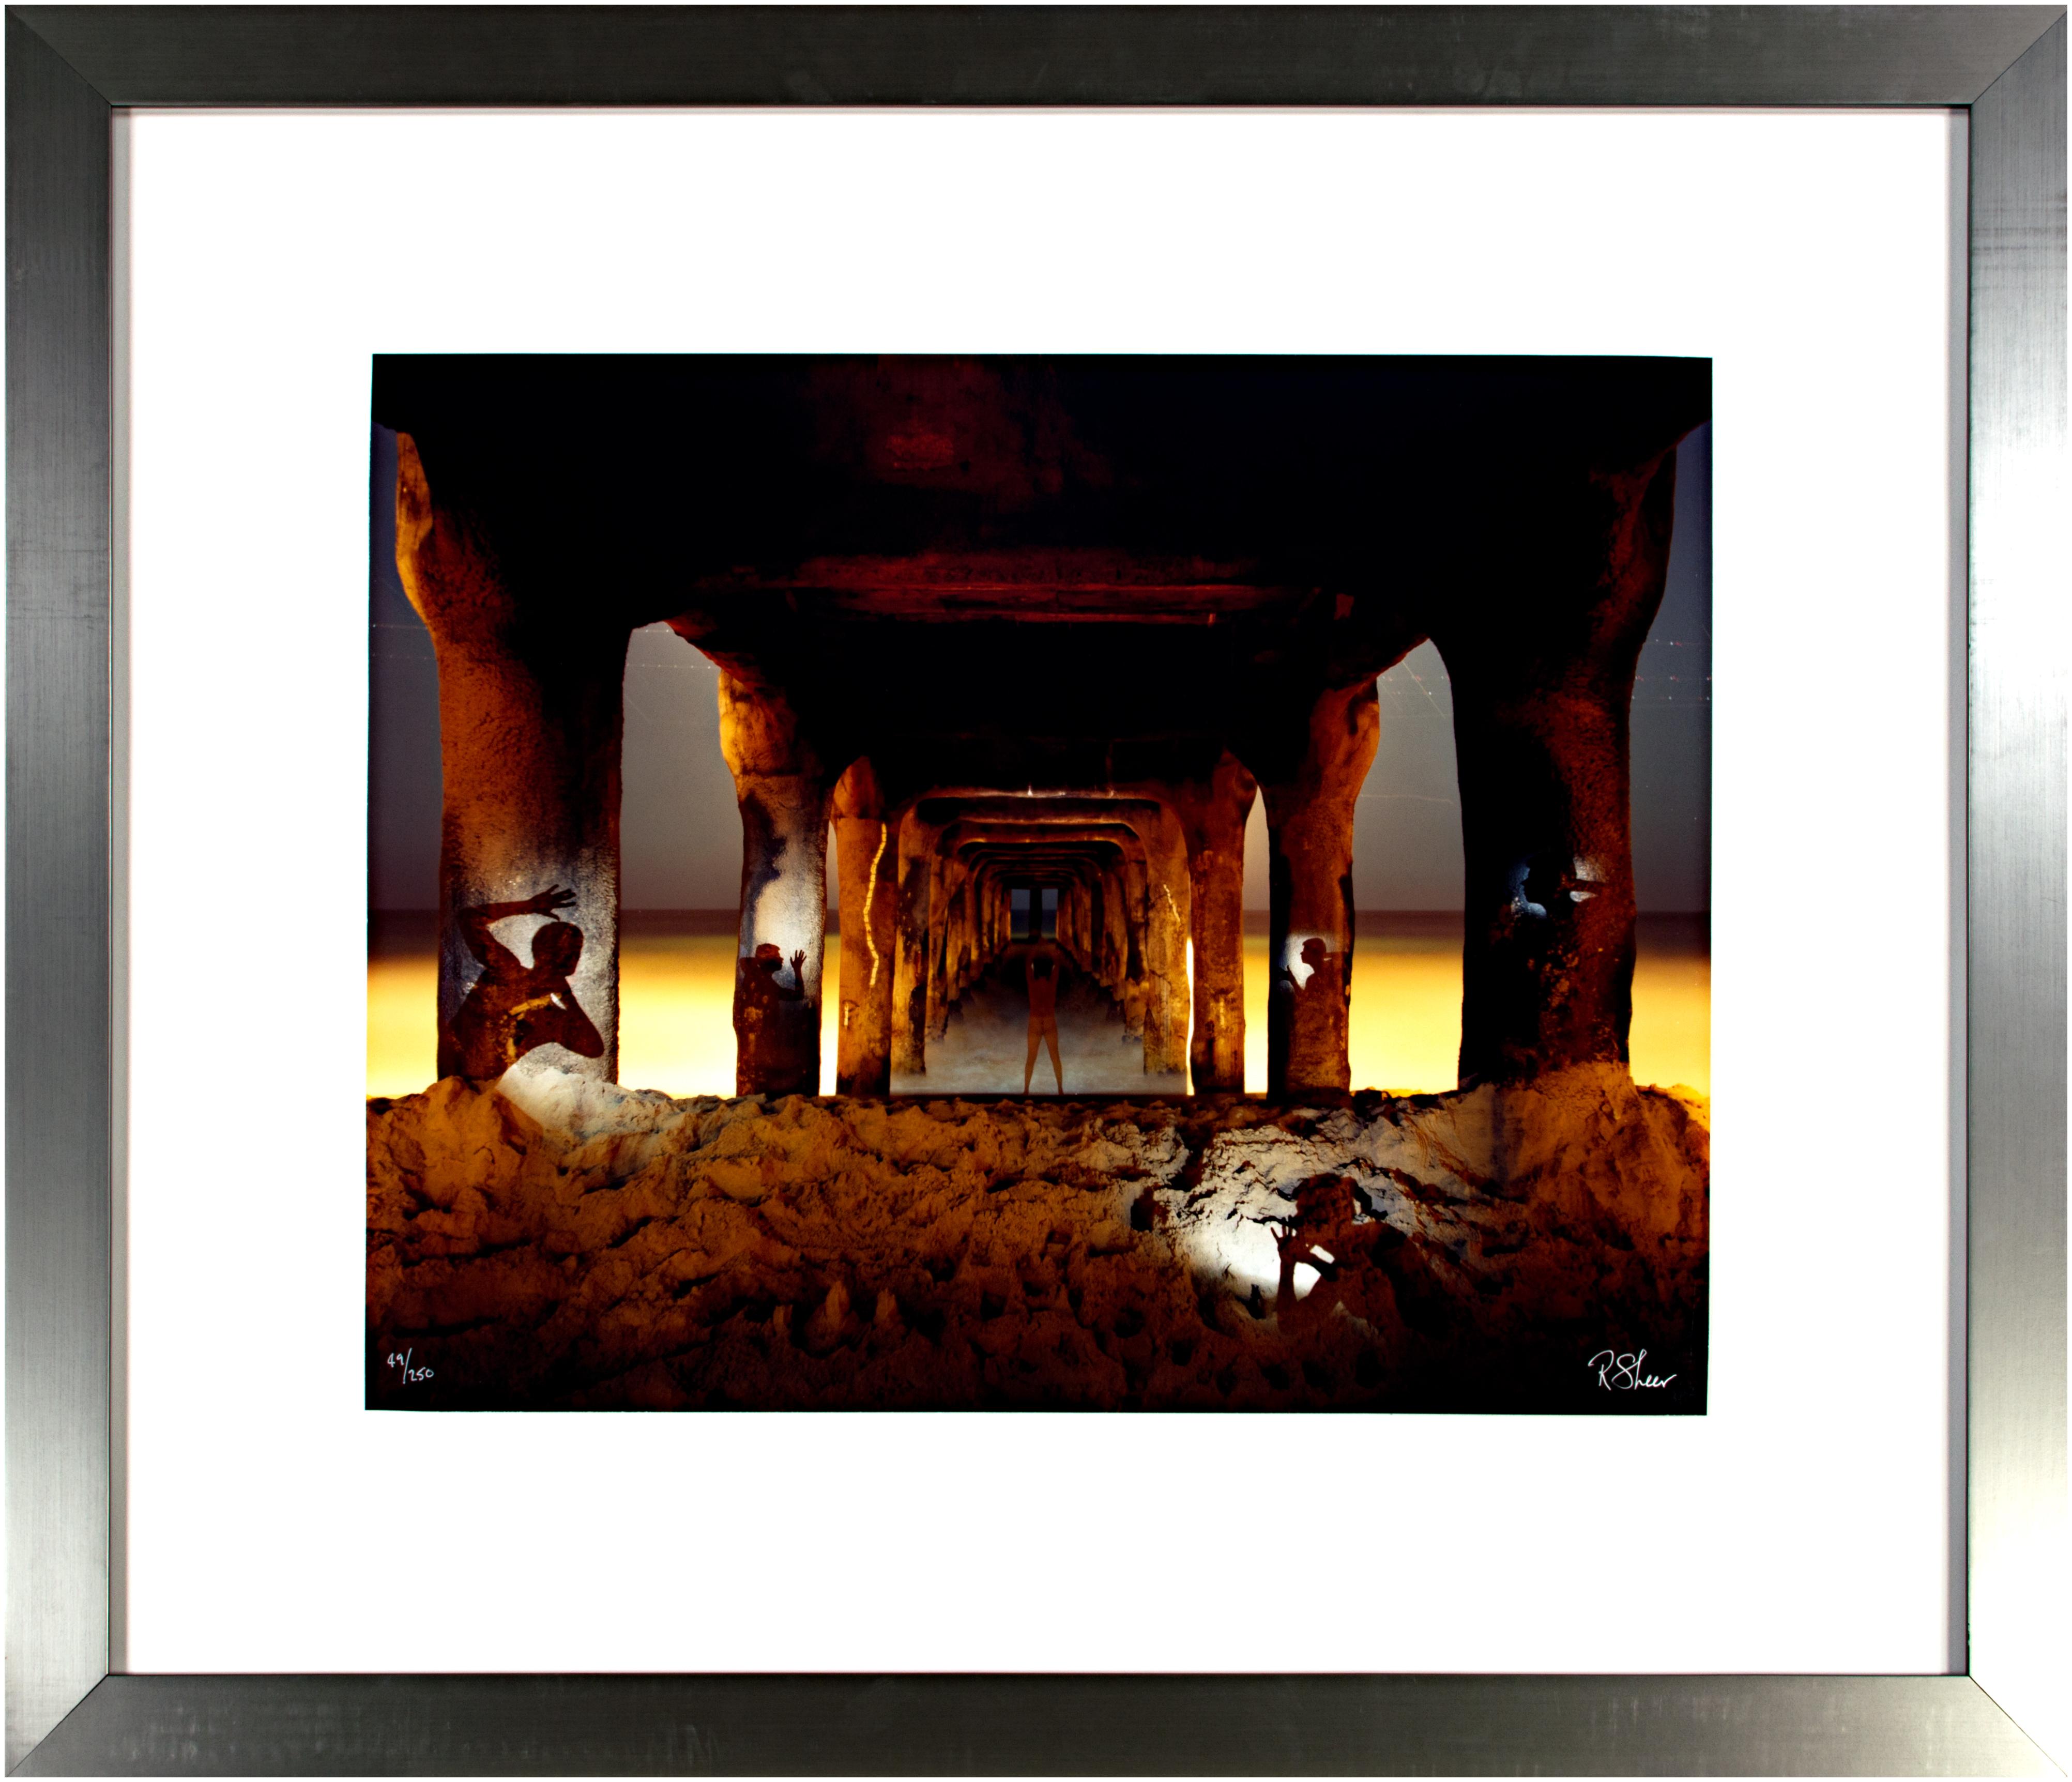 'Under the Manhattan Beach Pier No. 1' exemplifies the long-exposure photography of Robert Kawika Sheer. The artist signed this piece in the lower right and editioned in the lower left. Edition: 49/250. Sheer has the camera looking down the long